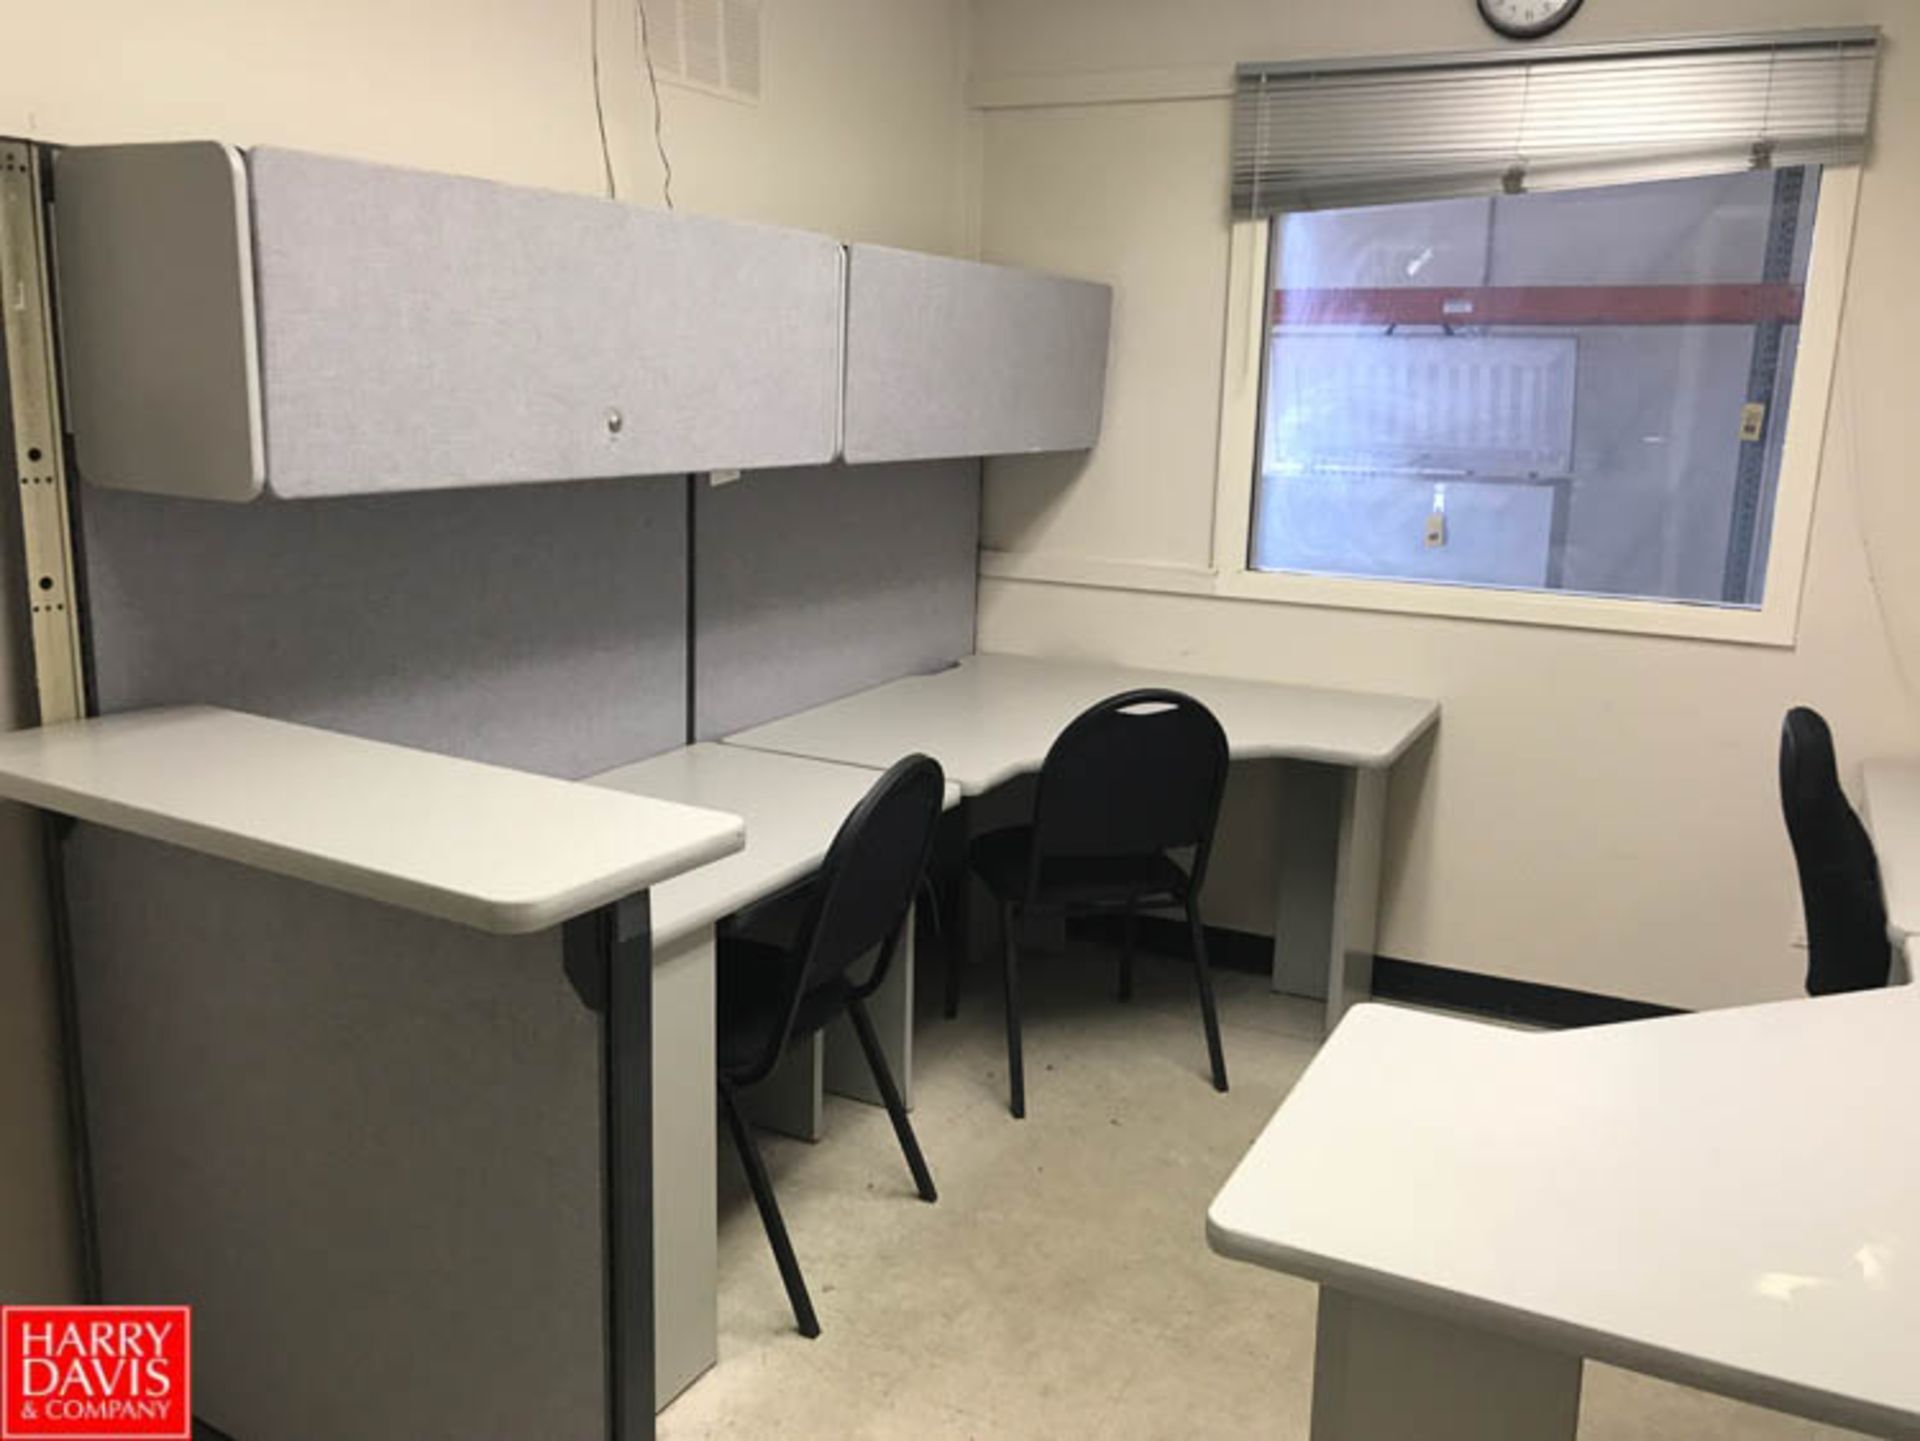 Modular Work Stations with Dell PC and Chairs Rigging Fee: $ 150